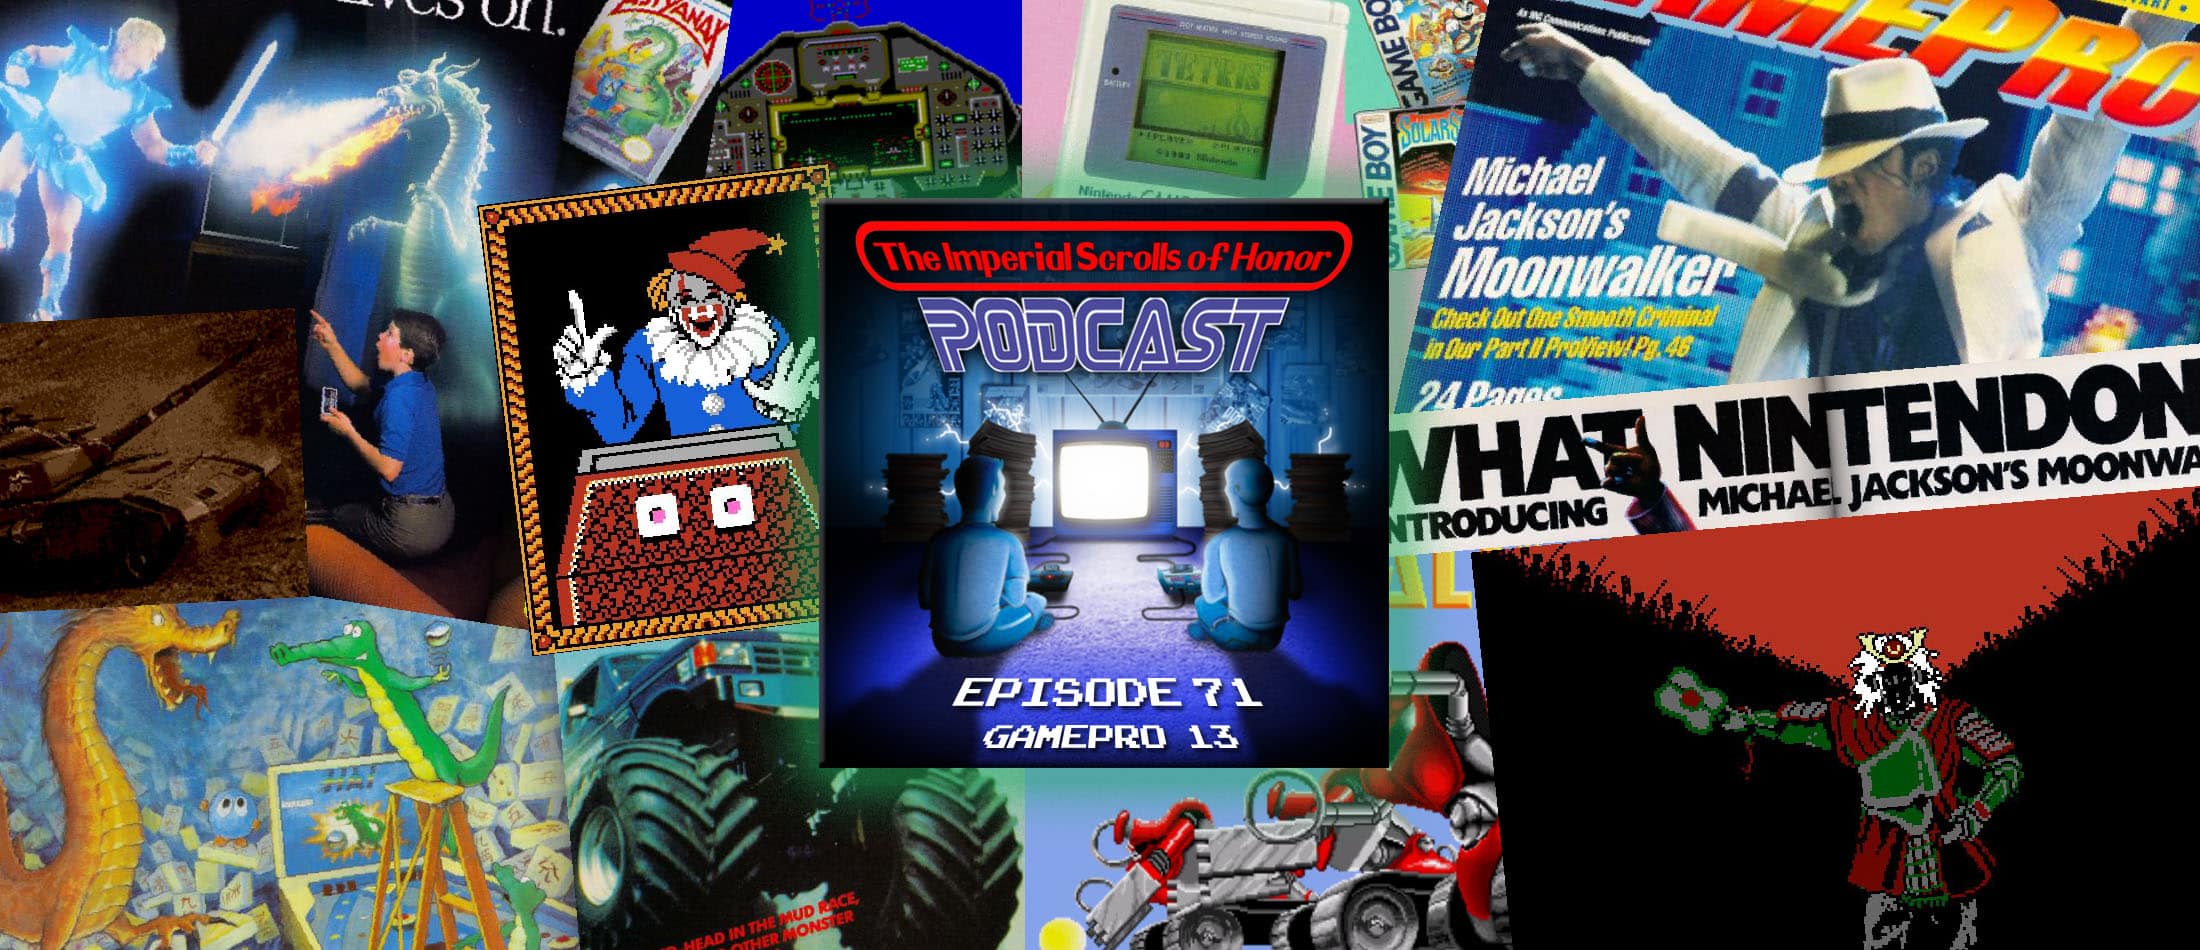 The Imperial Scrolls of Honor Podcast - Ep 71 - GamePro #13